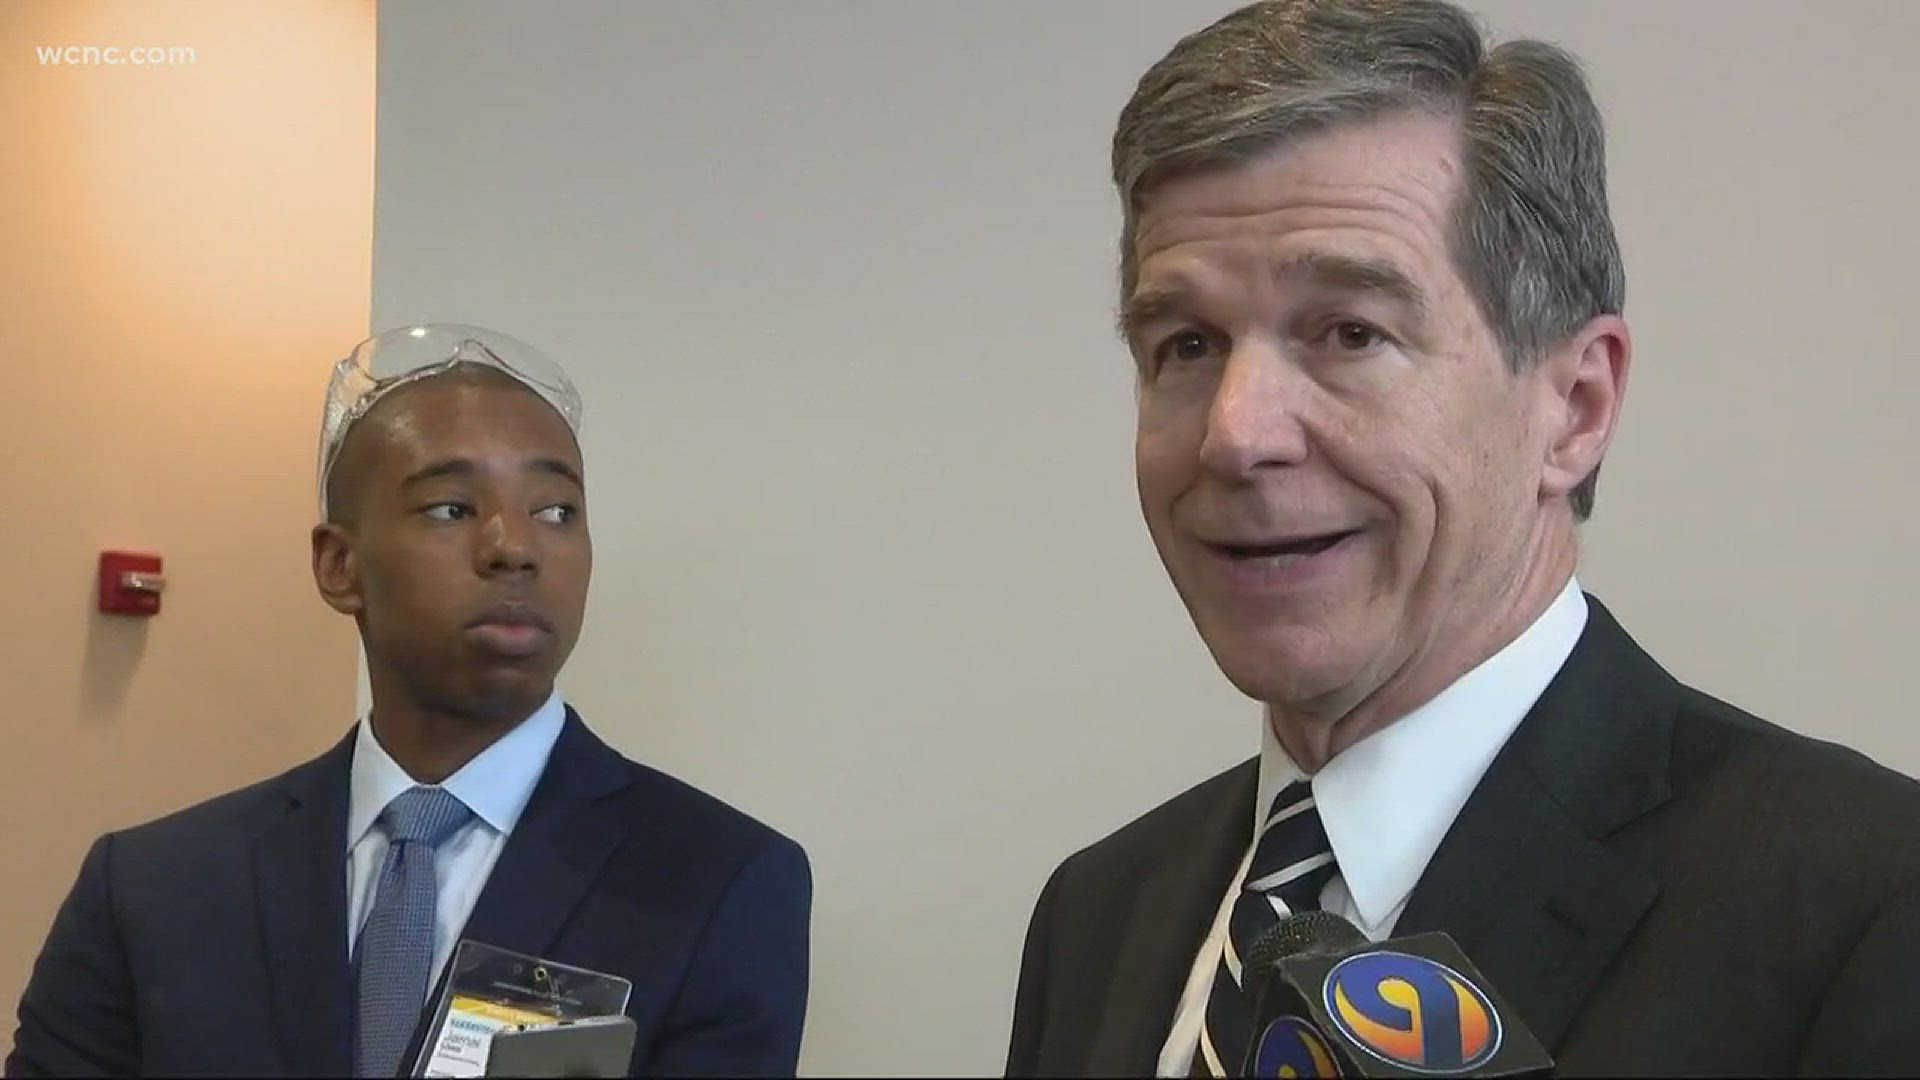 Governor Roy Cooper said something has to be done to protect school children but he does not think arming teachers is the answer.